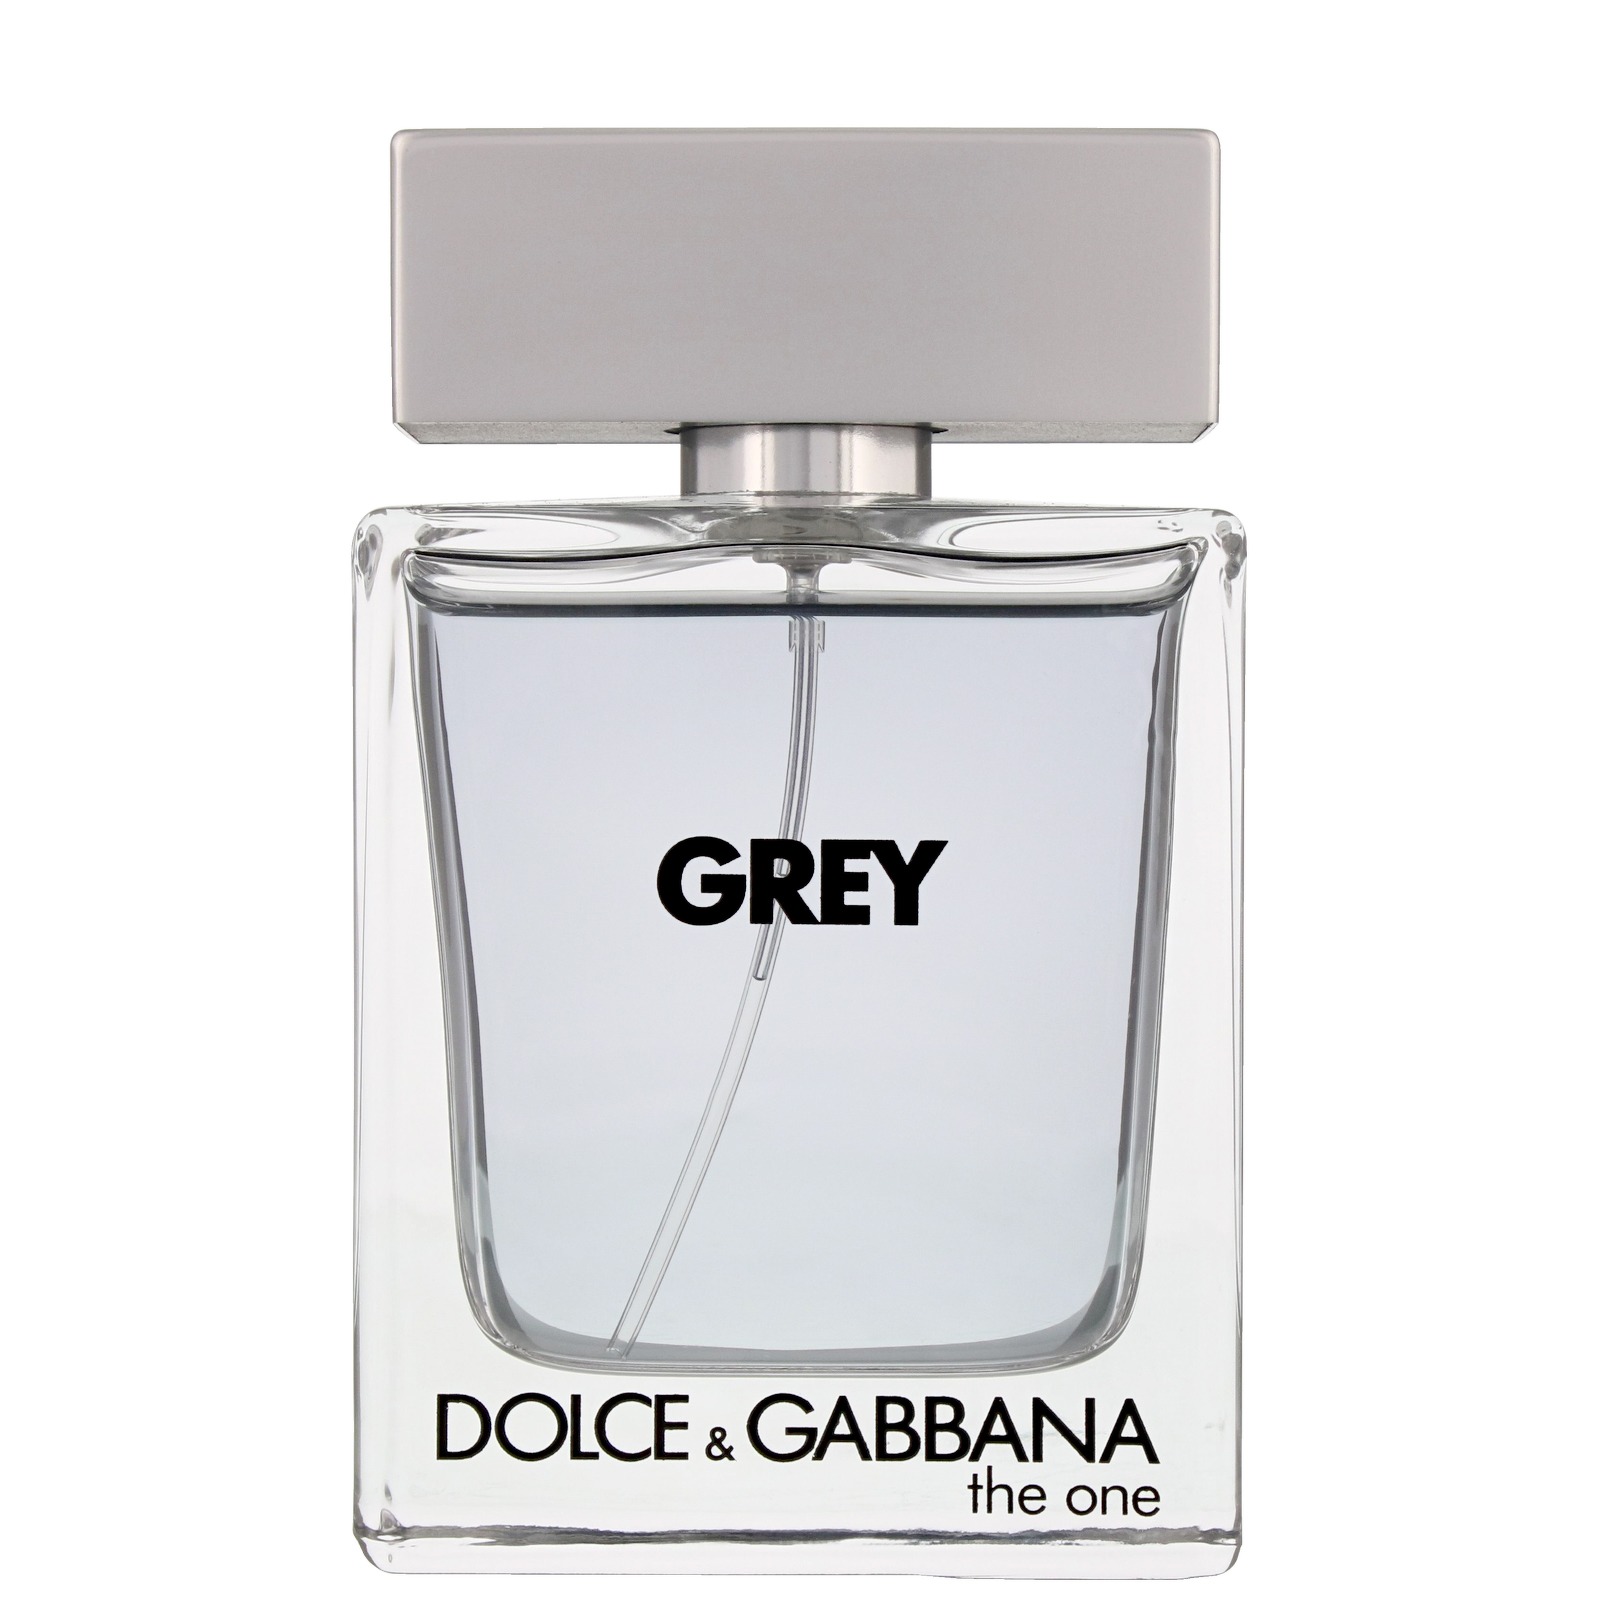 dolce gabbana grey cologne review